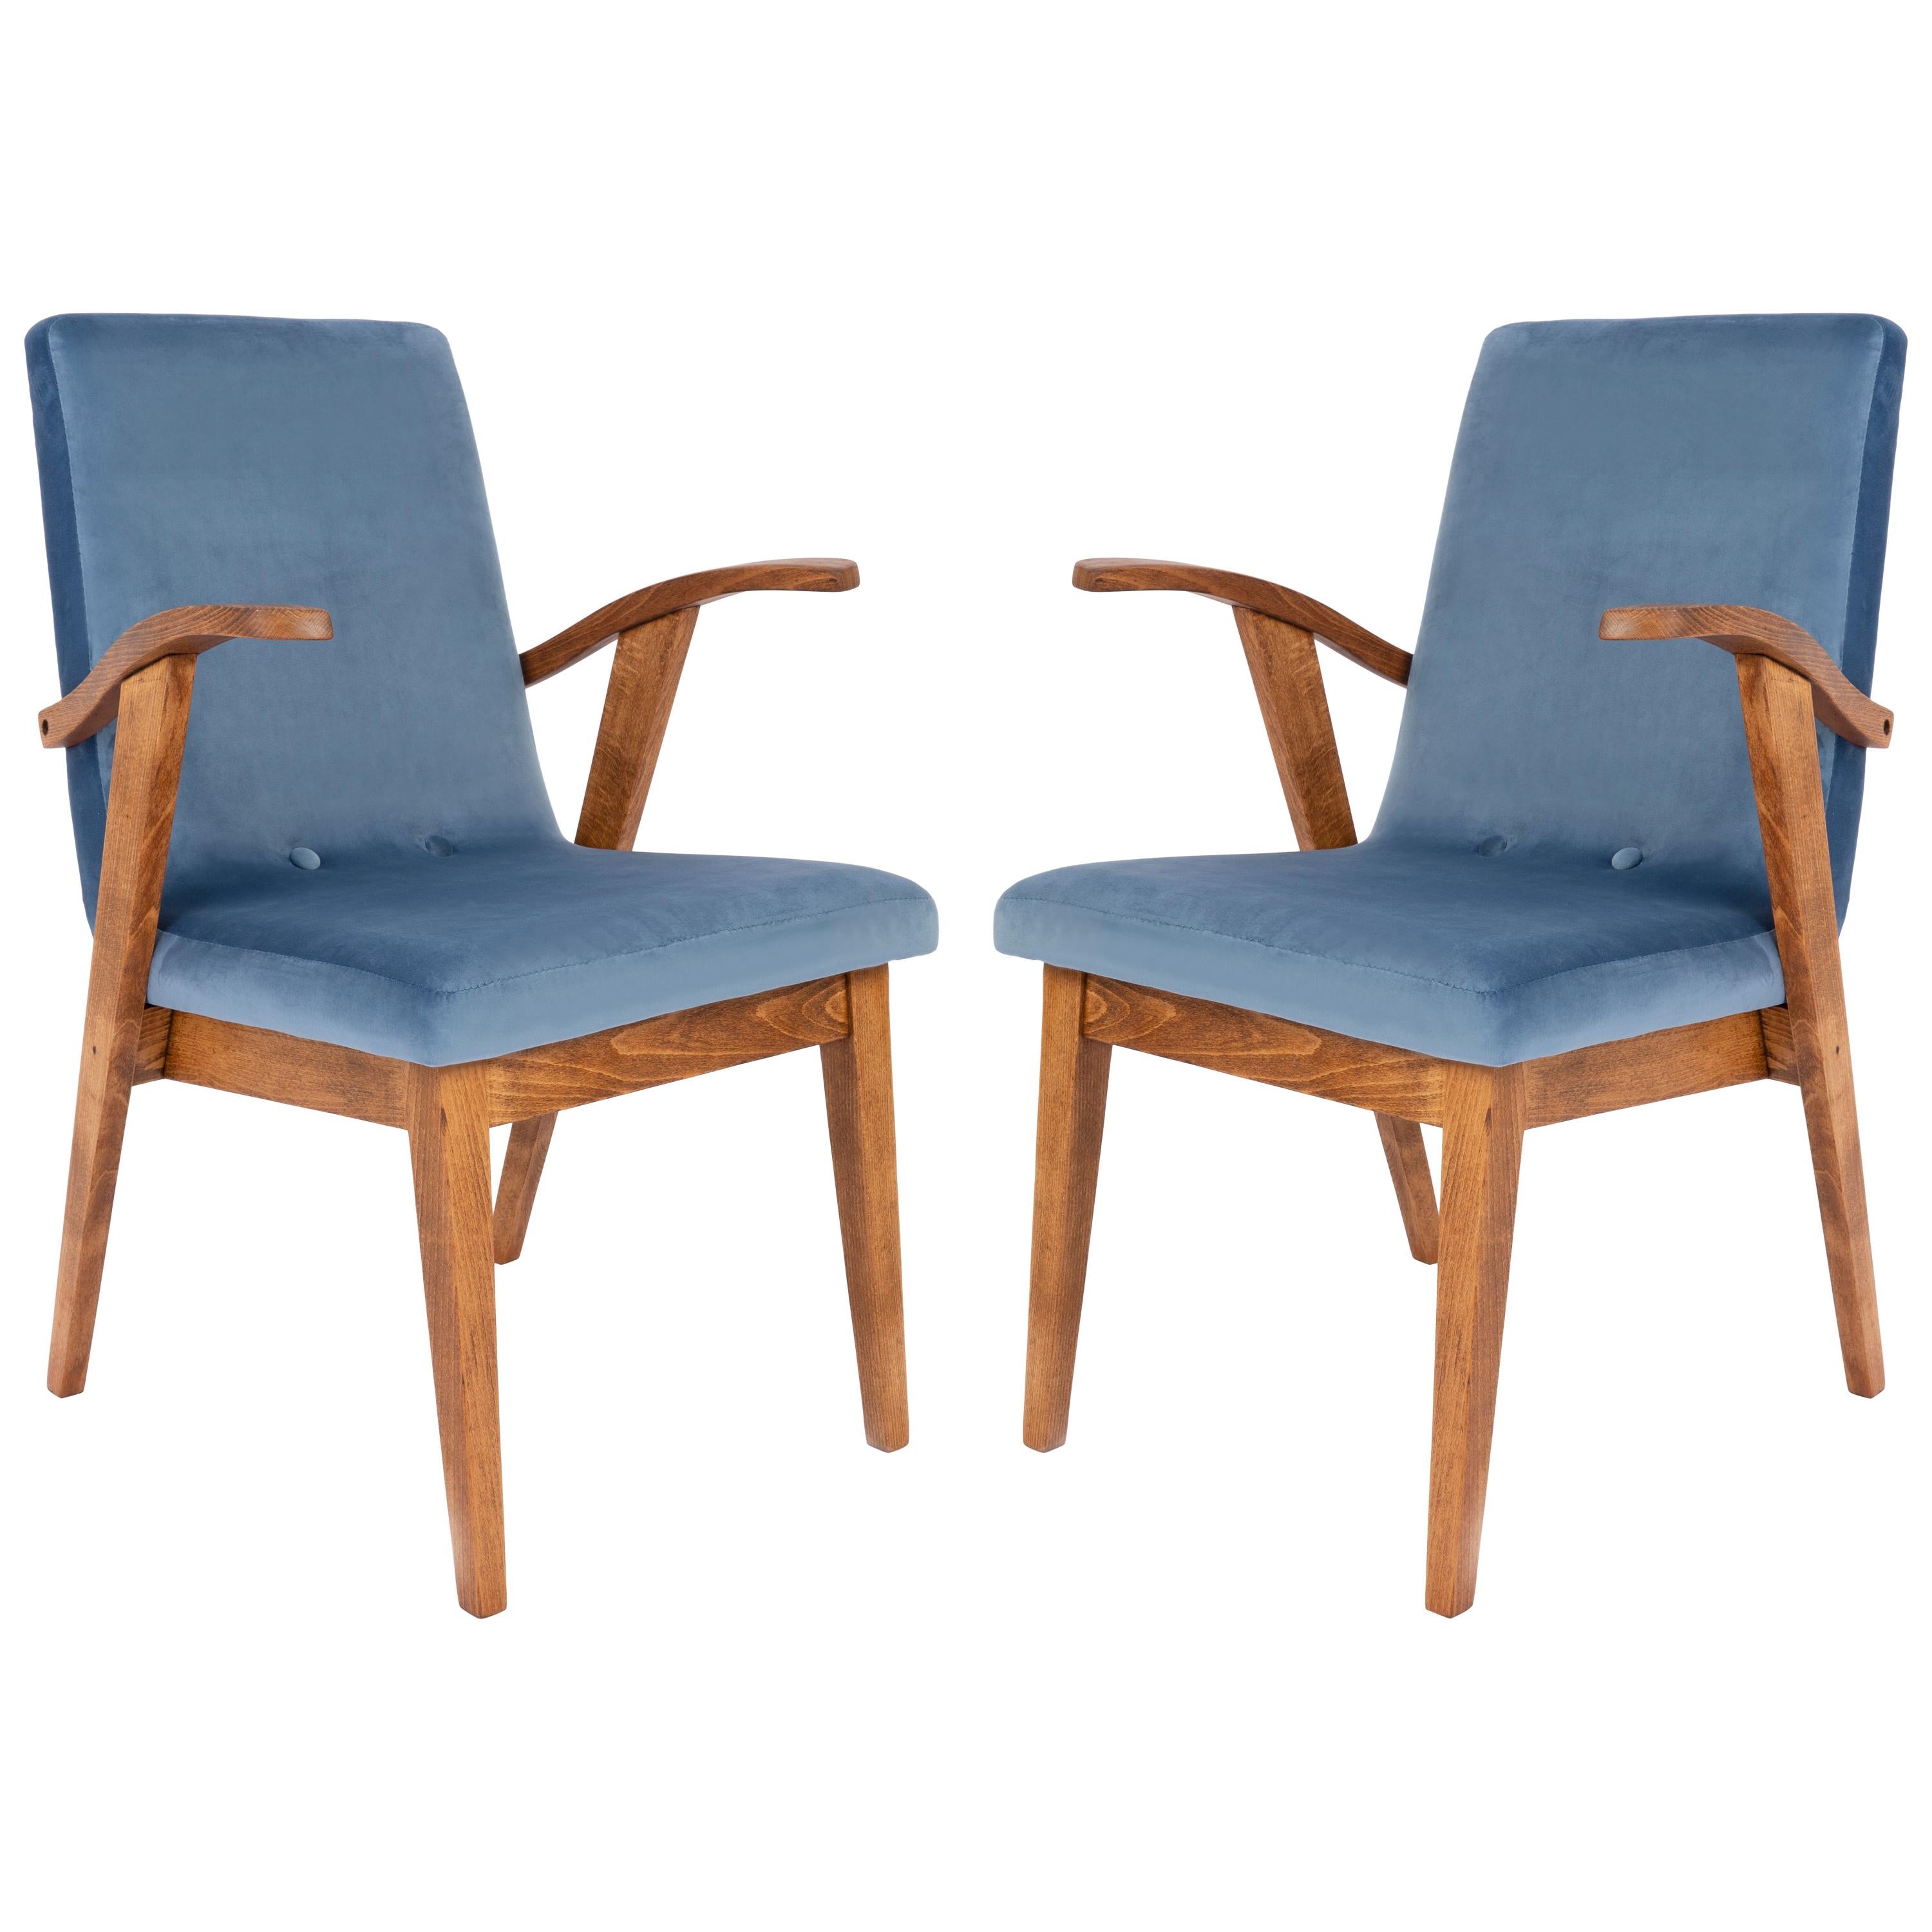 Pair of 20th Century Vintage Blue Chairs by Mieczyslaw Puchala, 1960s For Sale